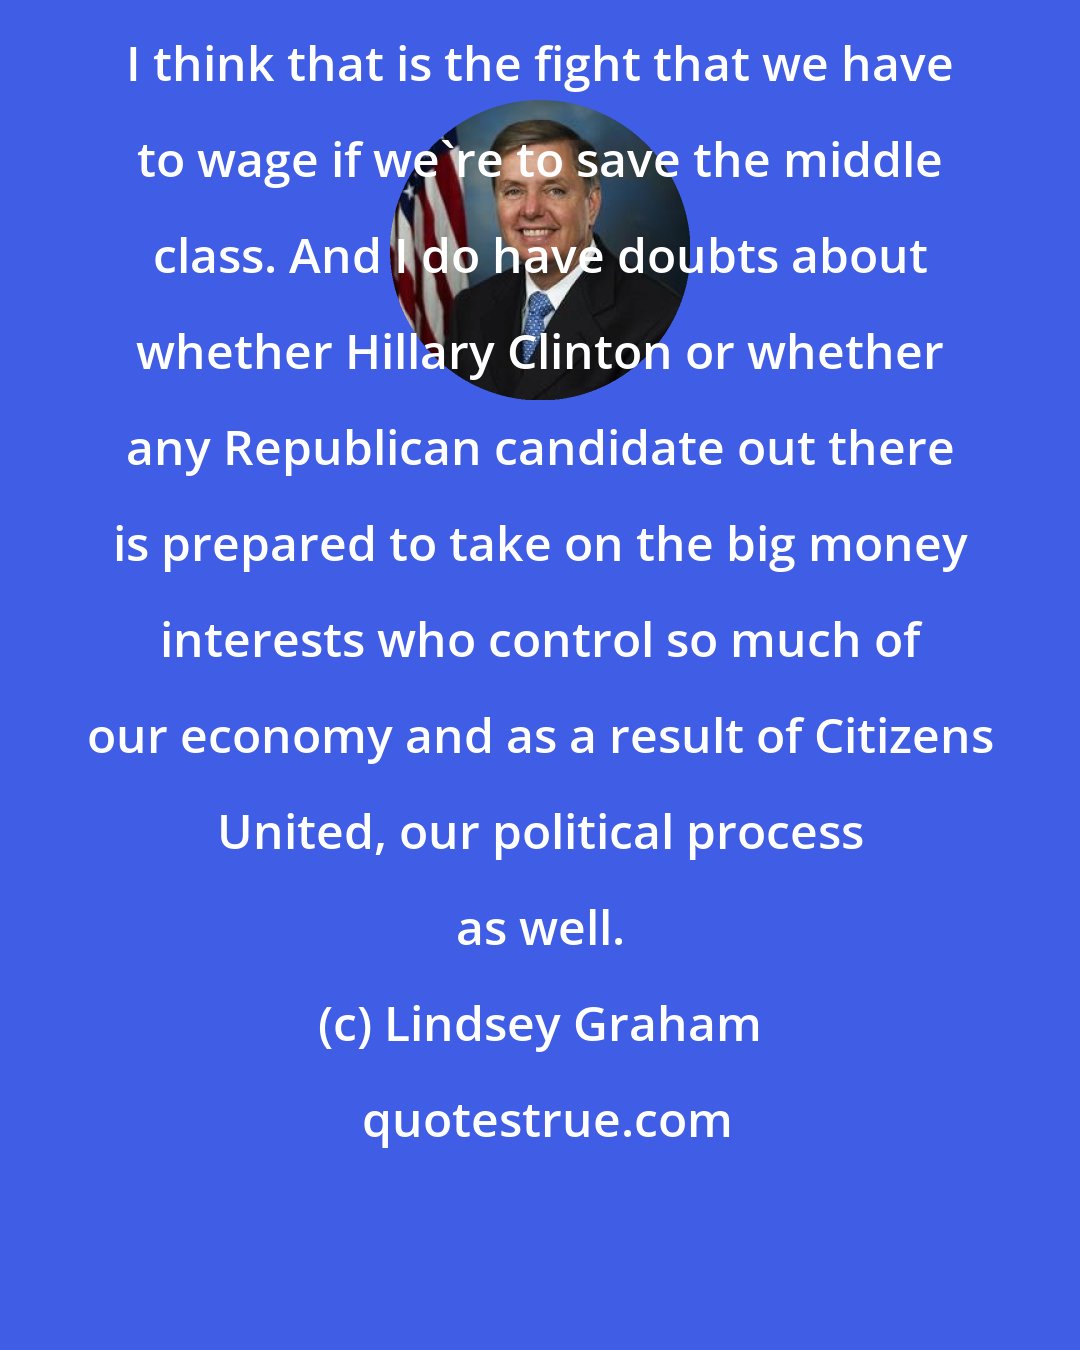 Lindsey Graham: I think that is the fight that we have to wage if we're to save the middle class. And I do have doubts about whether Hillary Clinton or whether any Republican candidate out there is prepared to take on the big money interests who control so much of our economy and as a result of Citizens United, our political process as well.